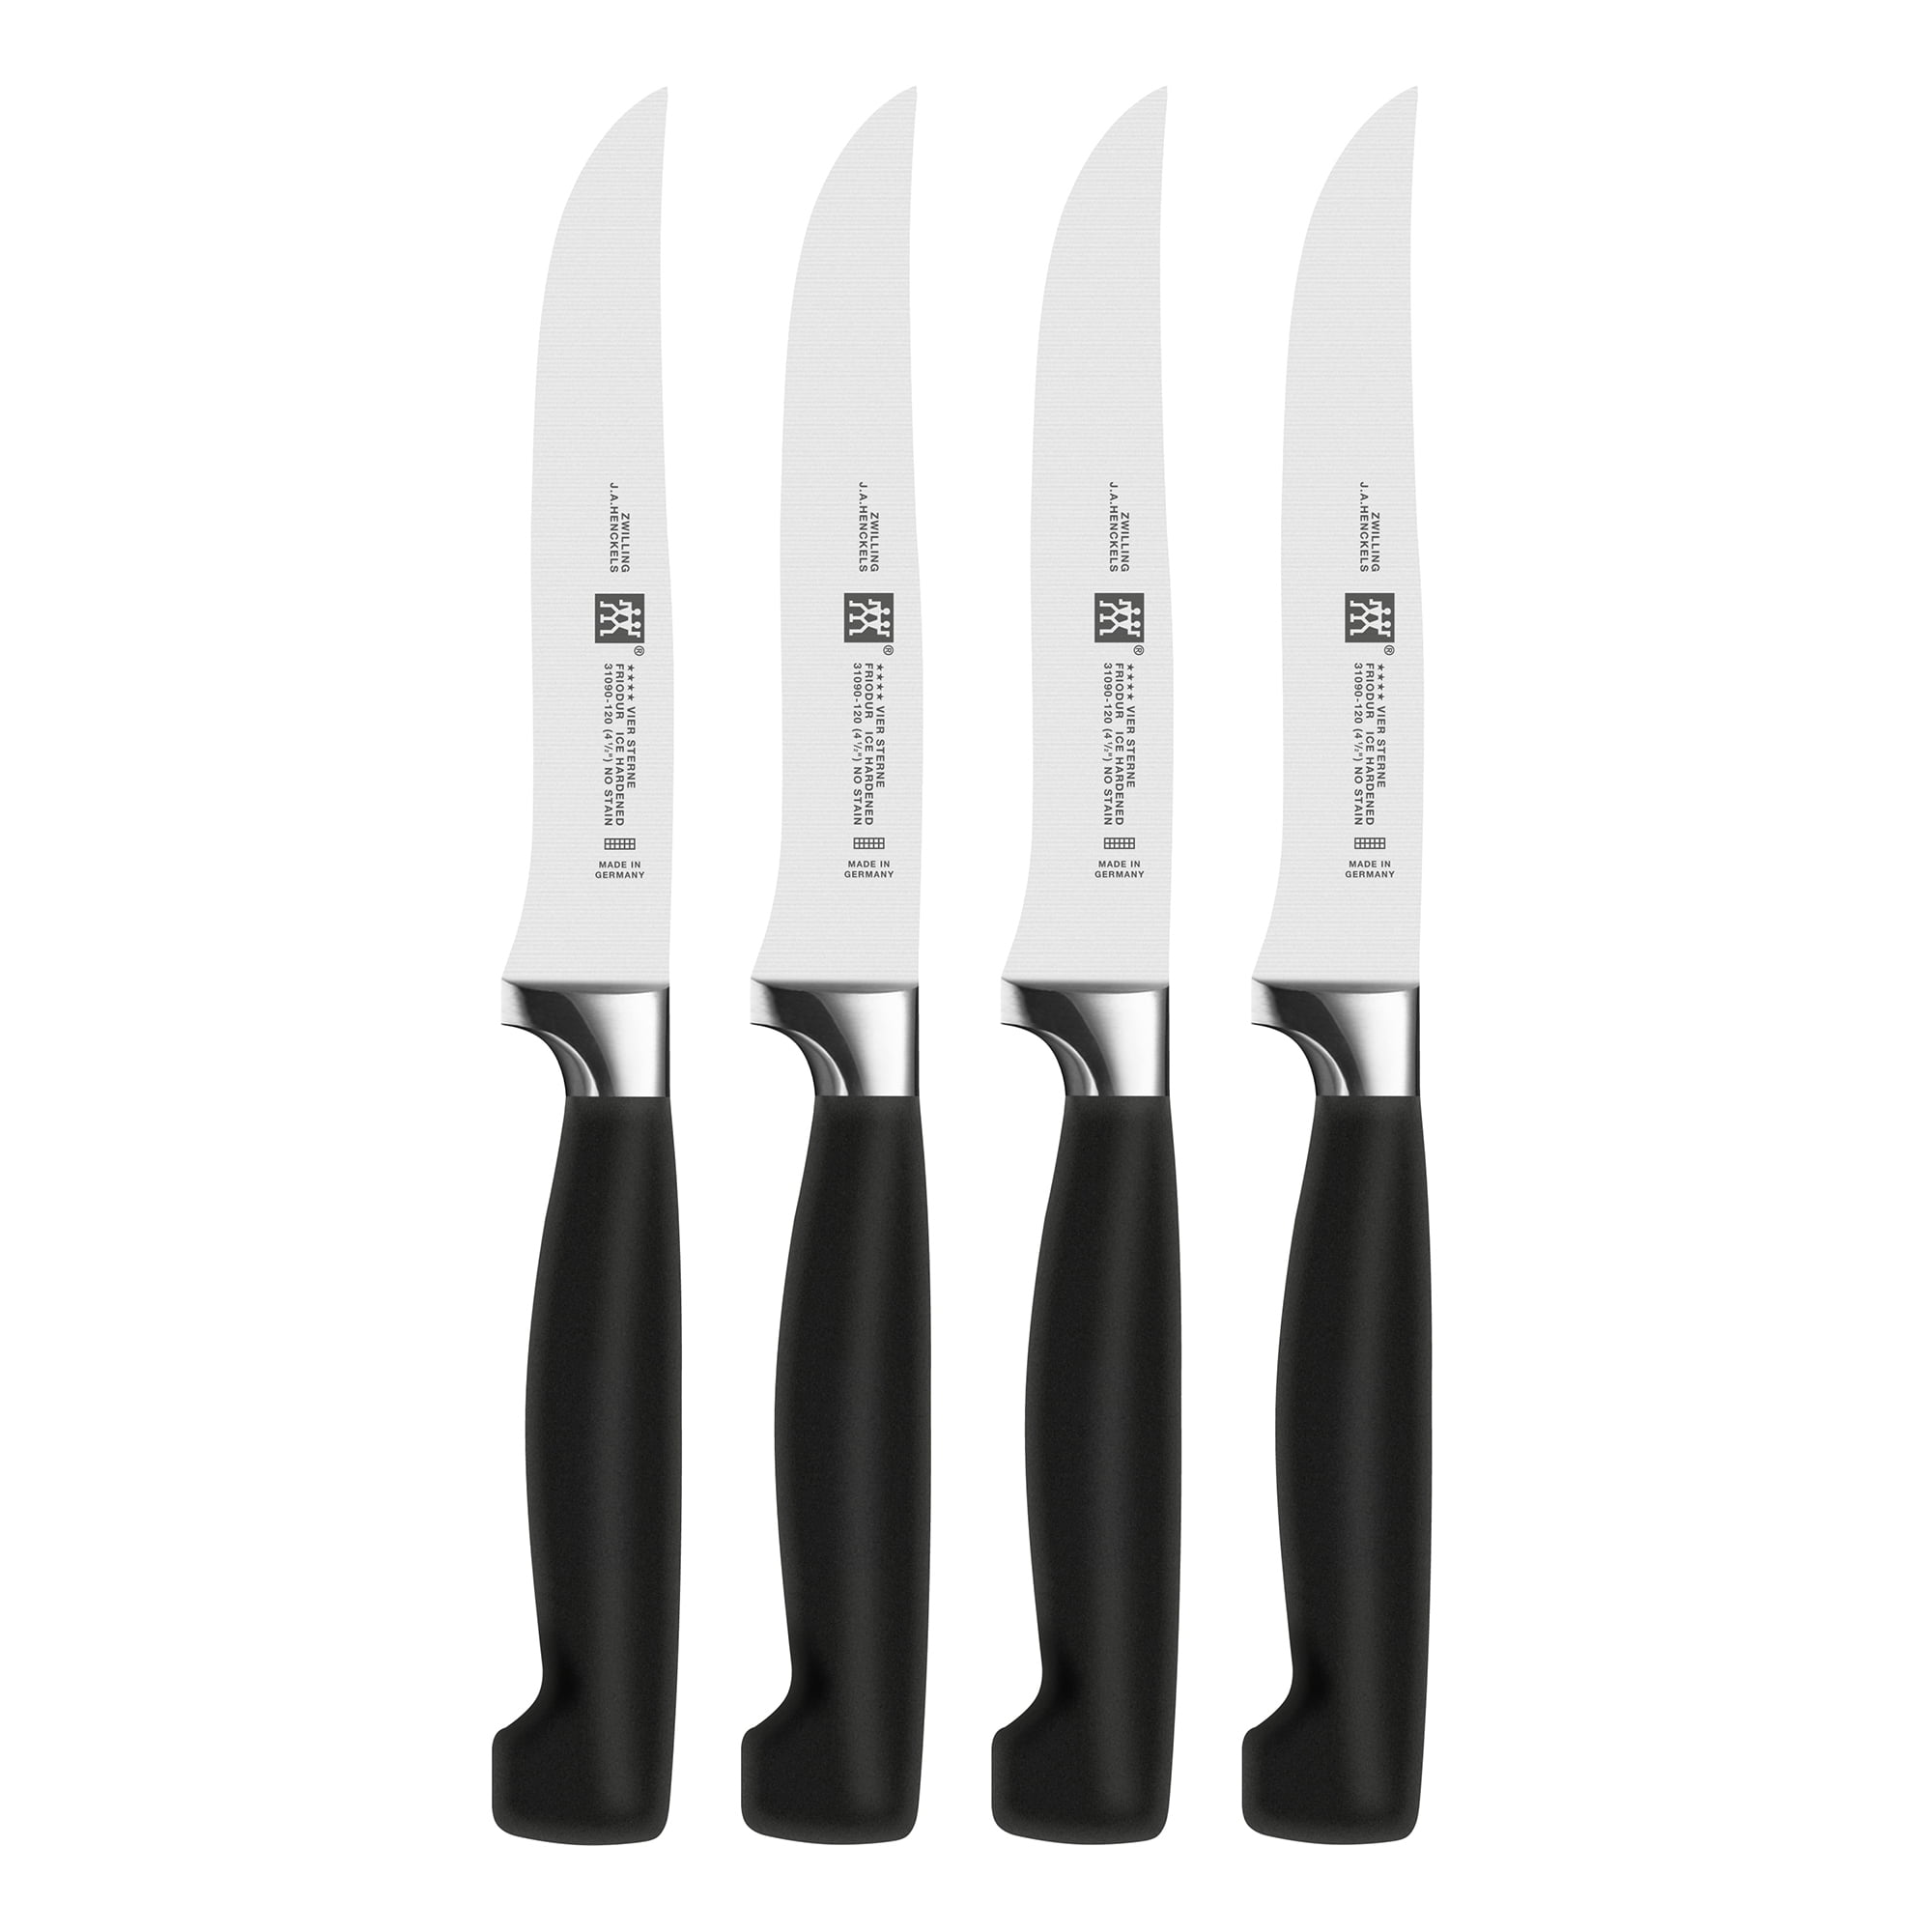 These Zwilling and Henckels steak knives are 72% off